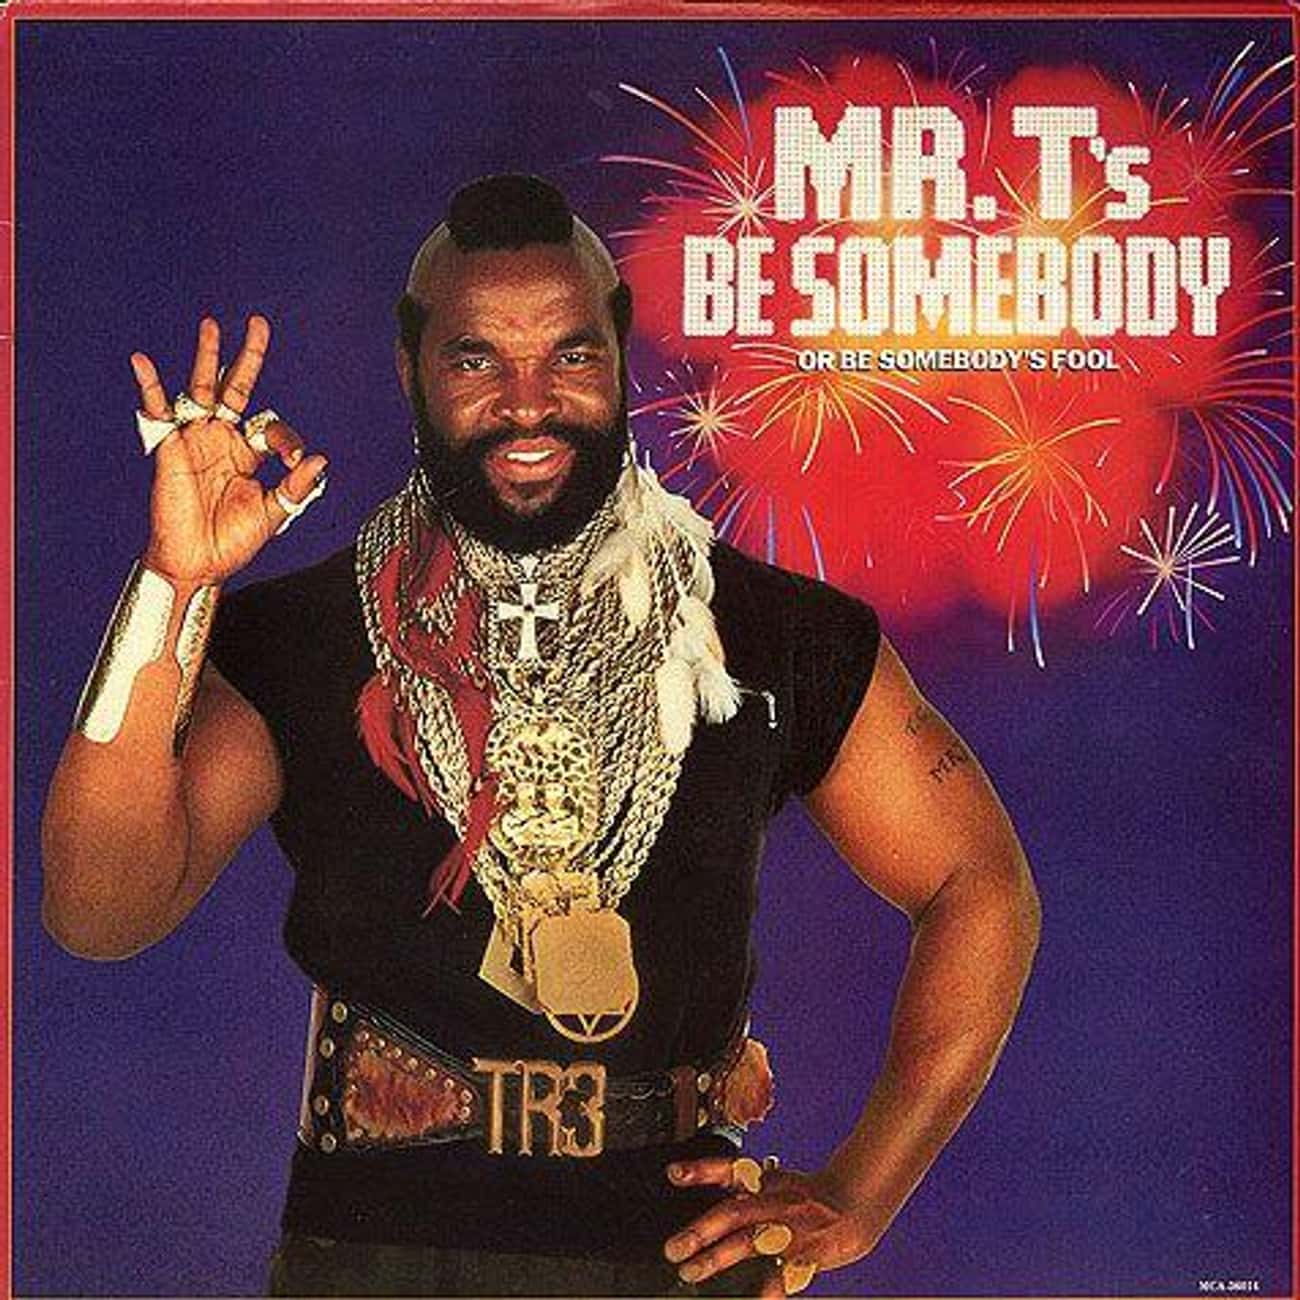 He Wrote Raps For Mr. T's 'Be Somebody... Or Be Somebody's Fool!'